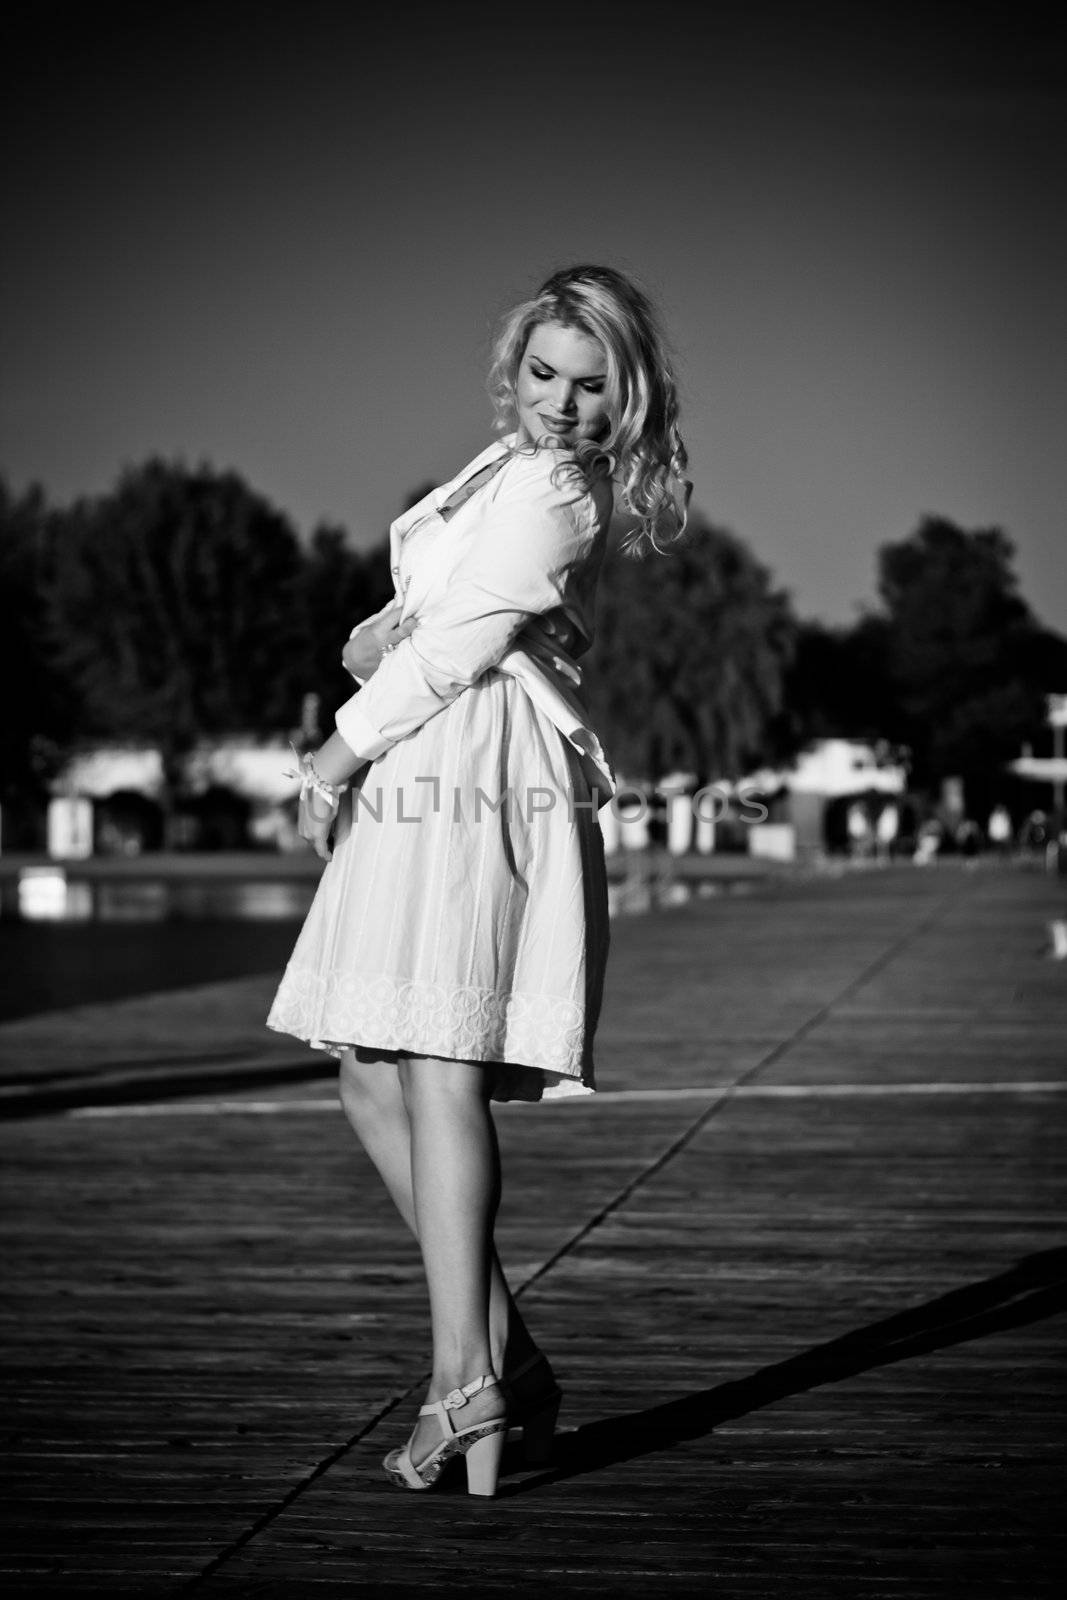 Photo of a Model standing on a wooden pier